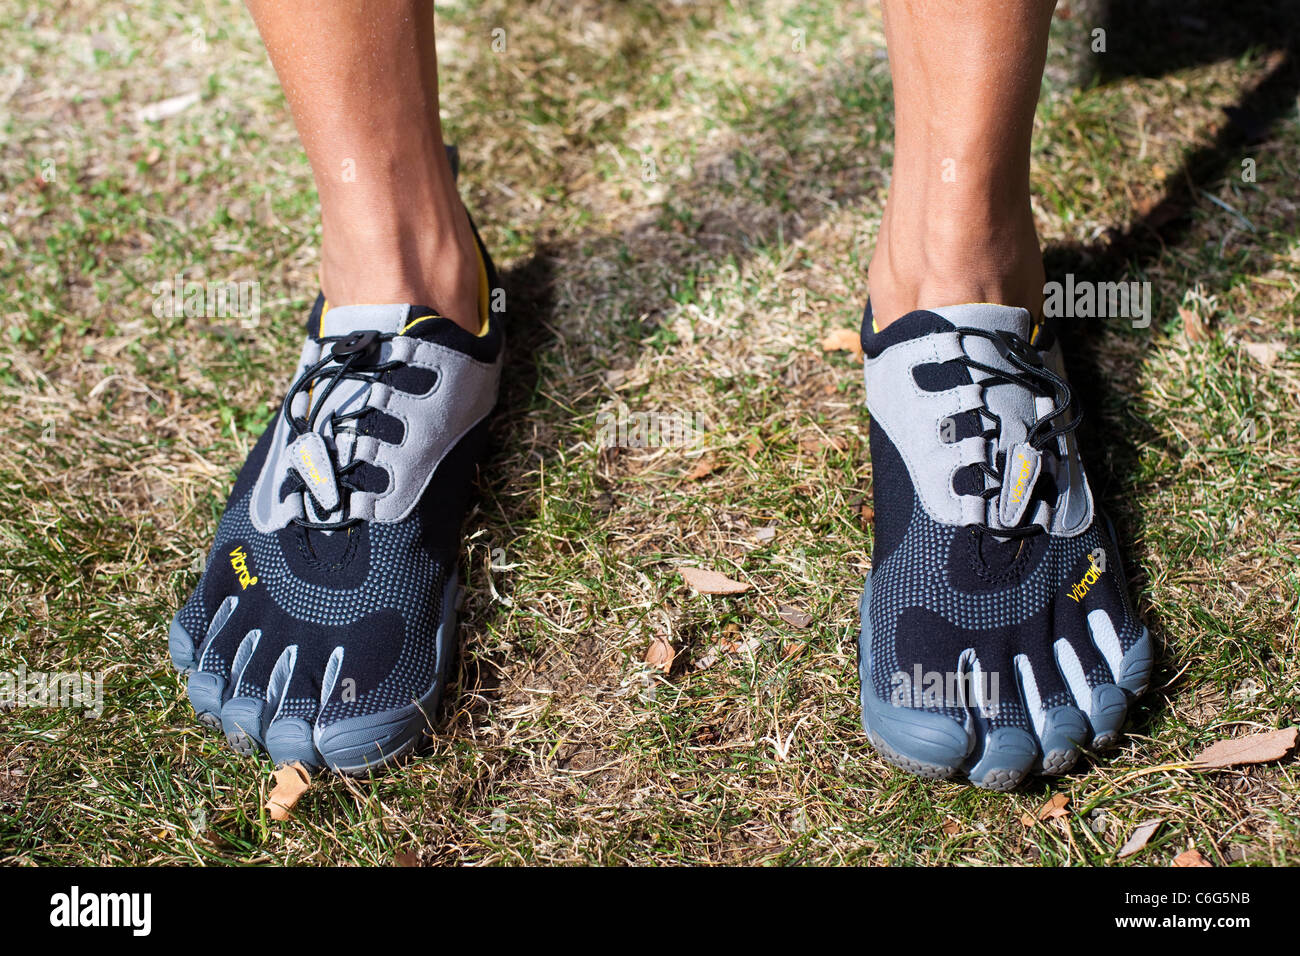 Man with vibram fivefingers shoes Stock Photo - Alamy